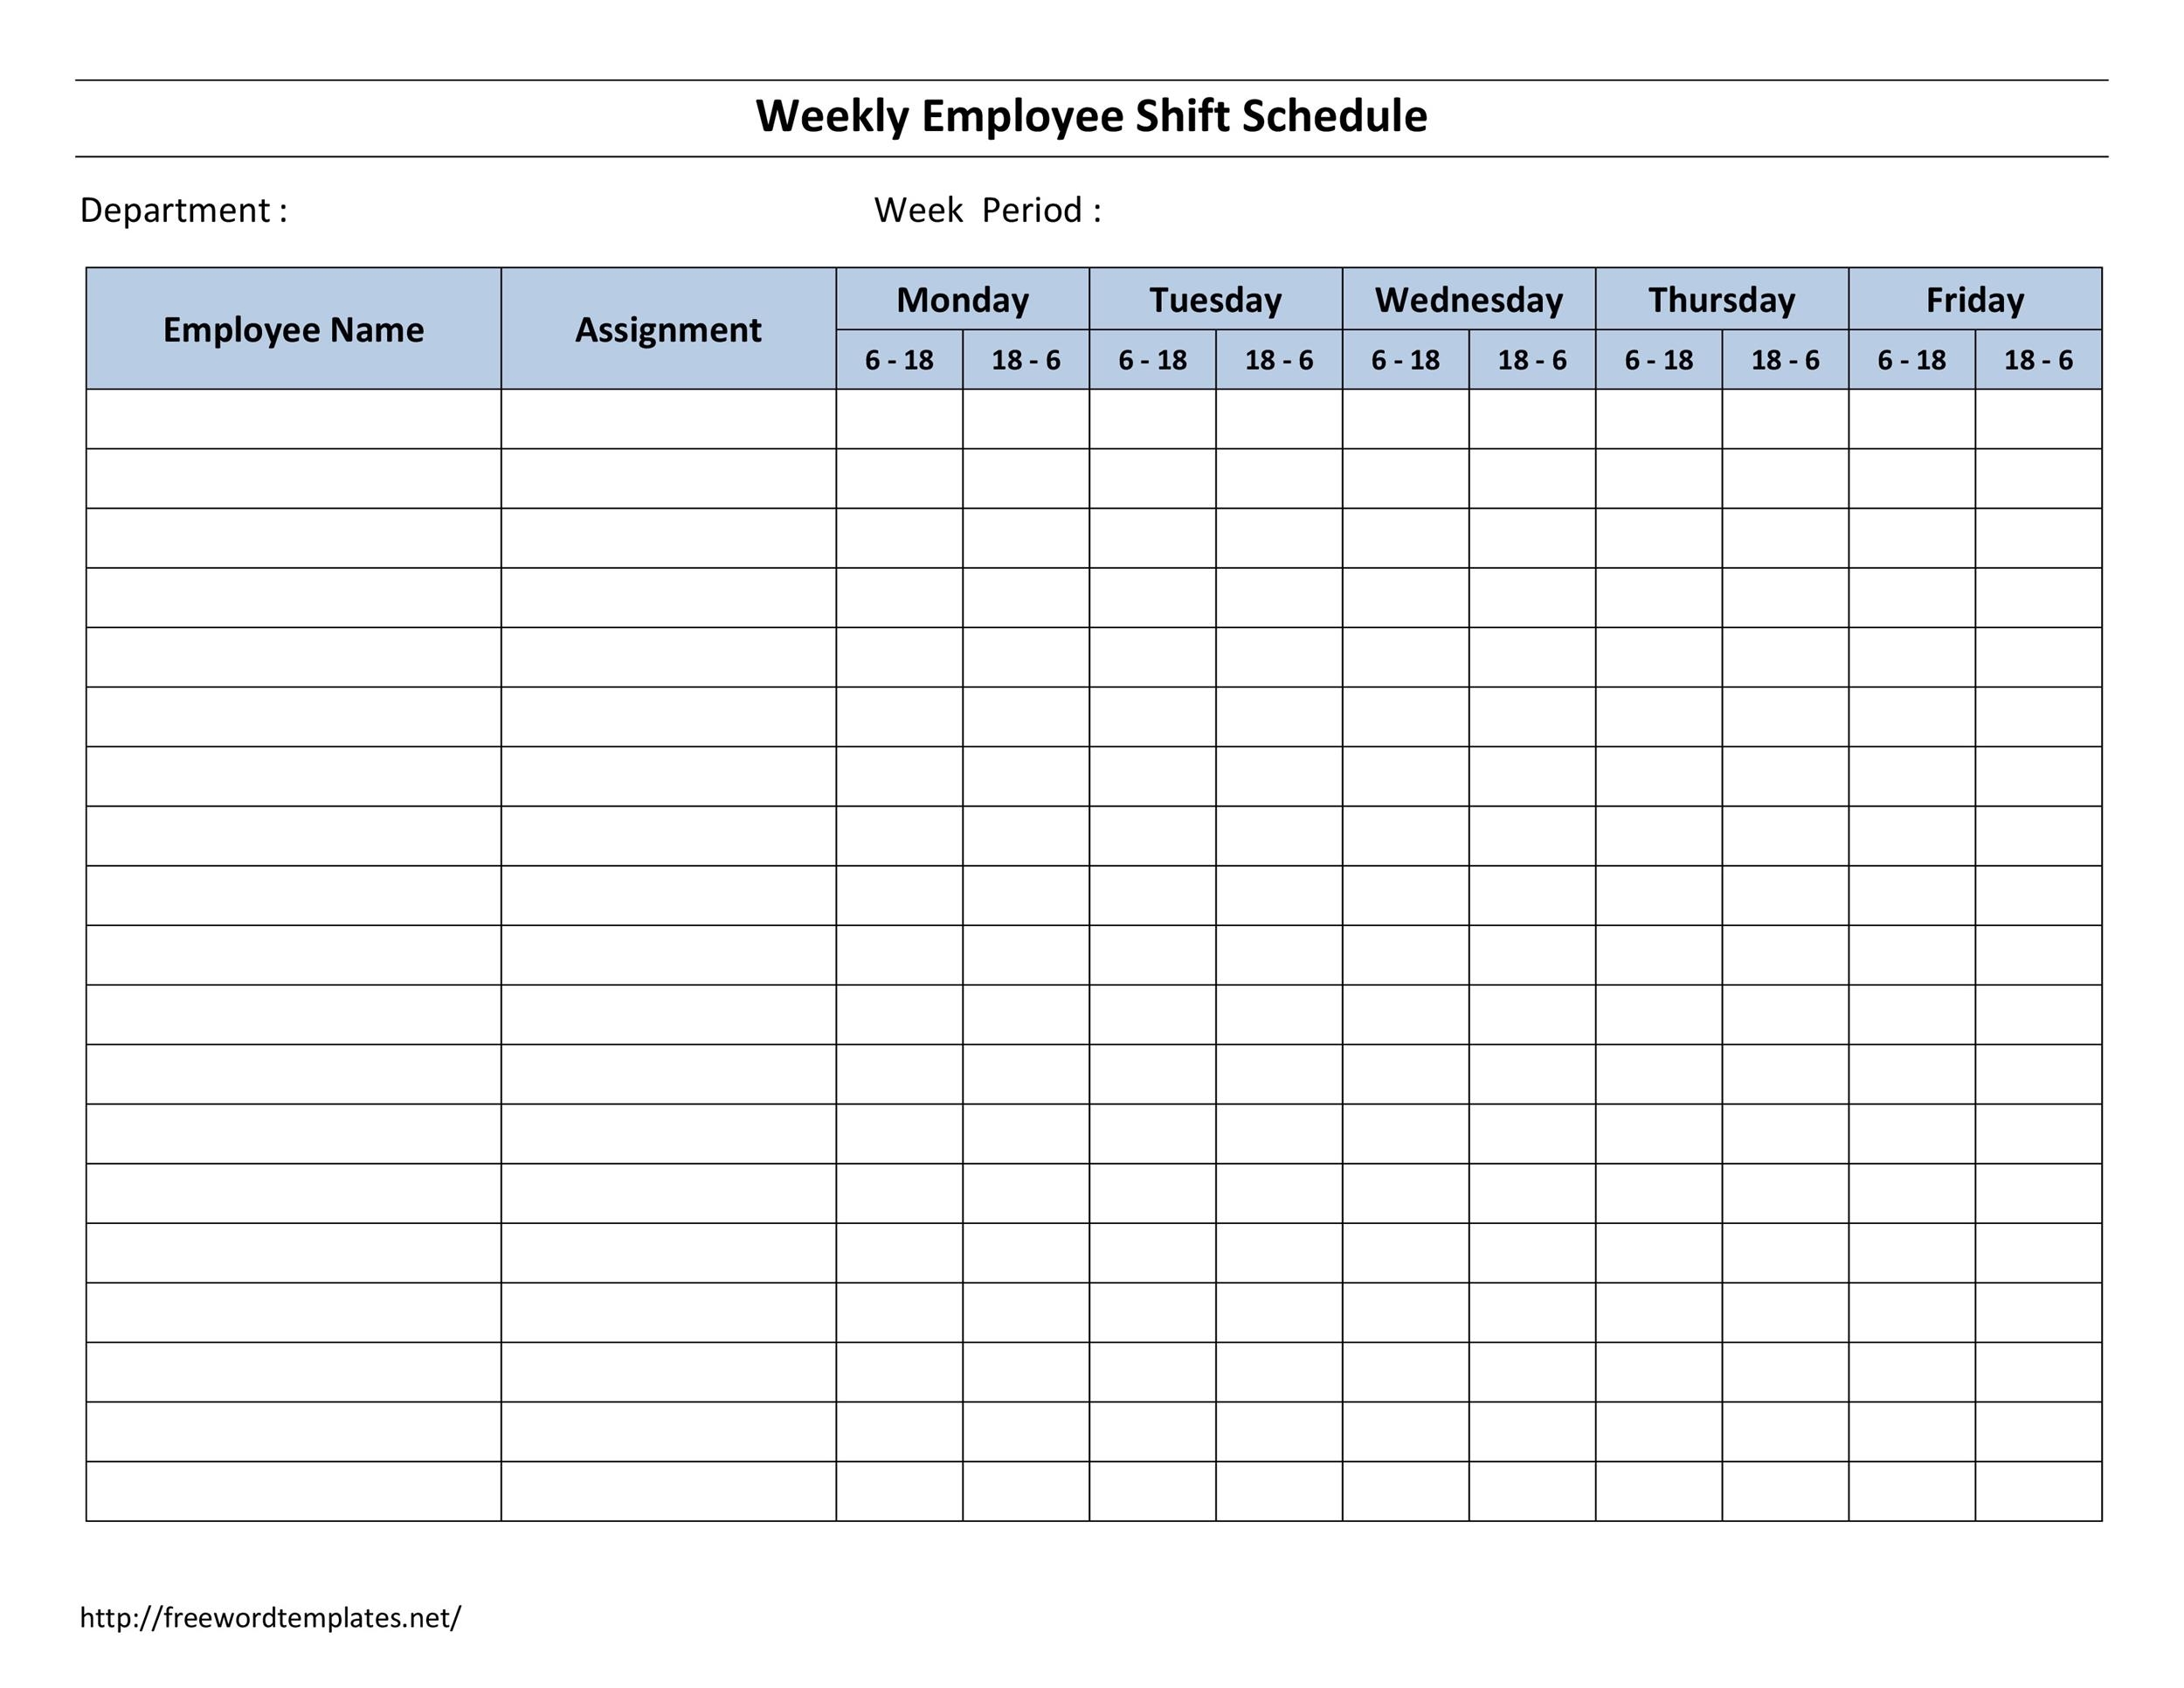 14 Dupont Shift Schedule Templats For Any Company [Free] ᐅ